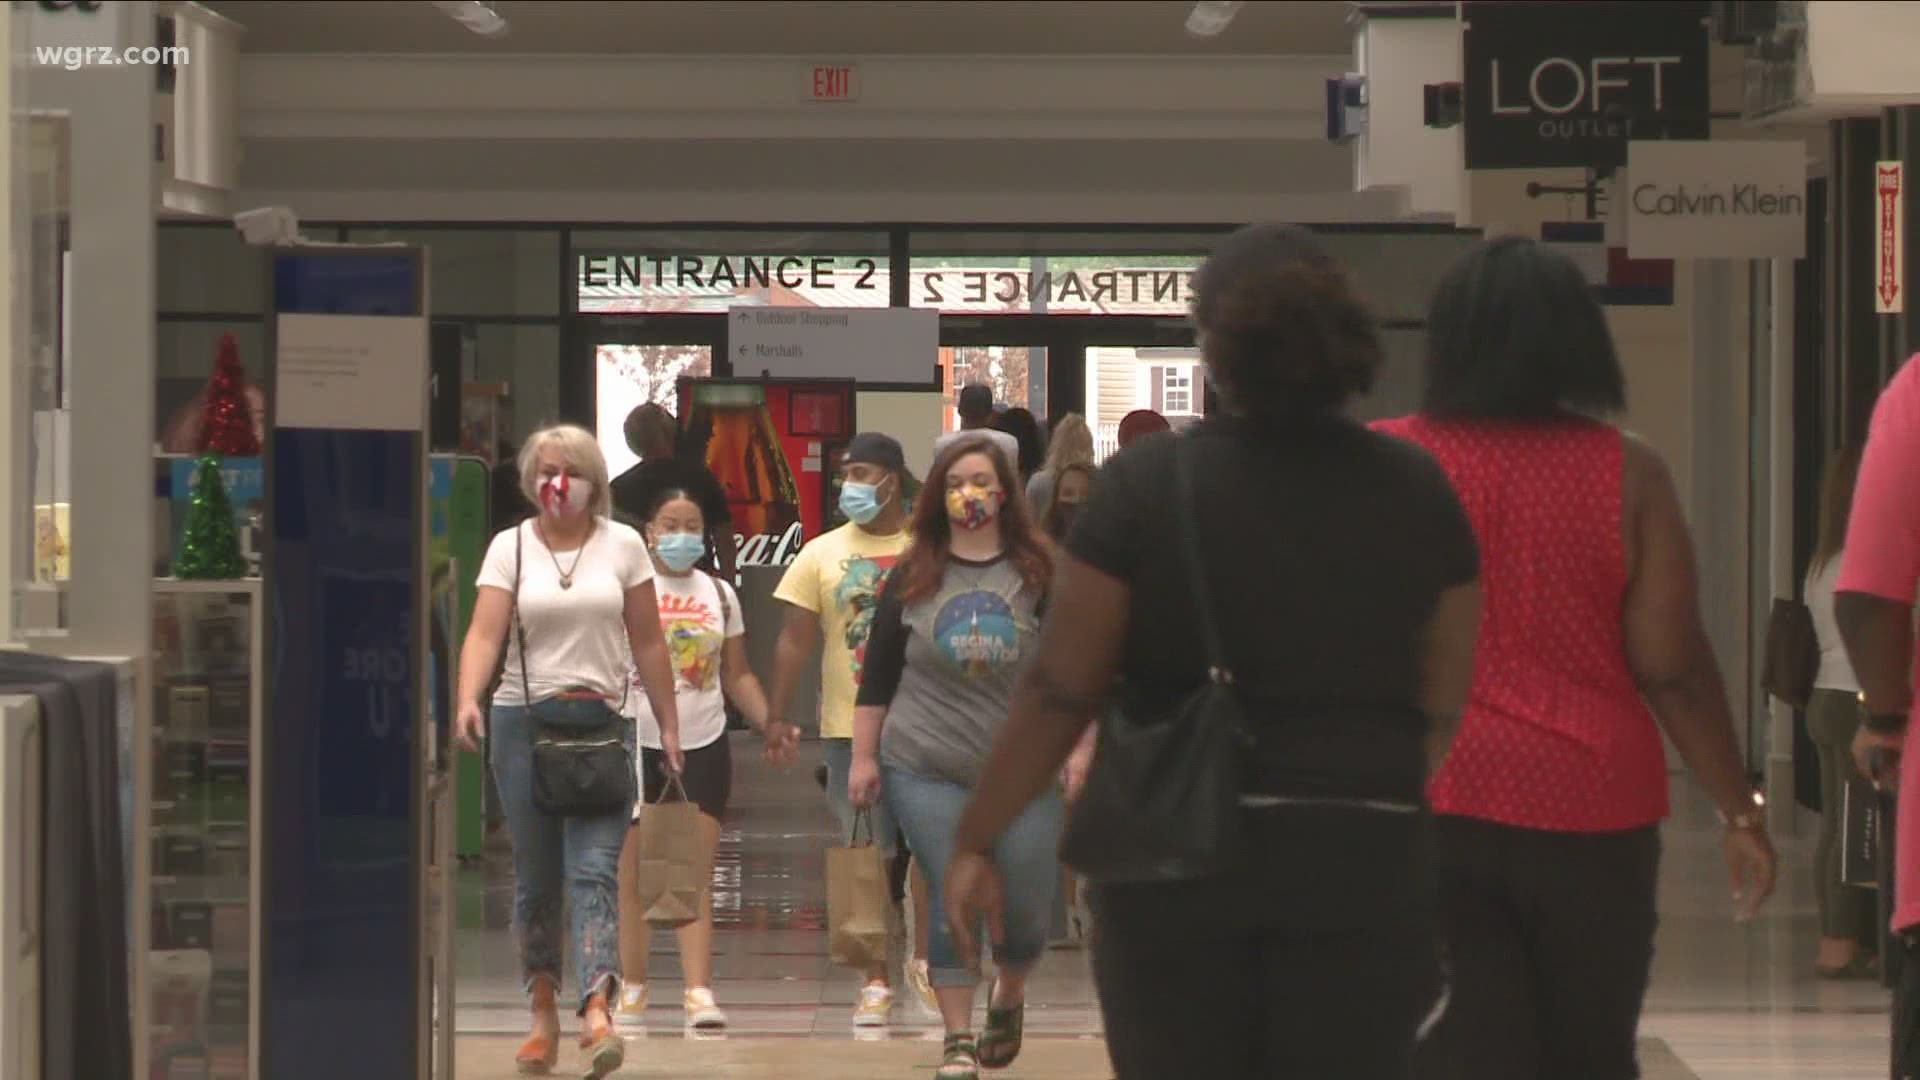 It's the first weekend shoppers have been able to spend the day at the mall in months. Malls here in Western New York officially re-opened yesterday.